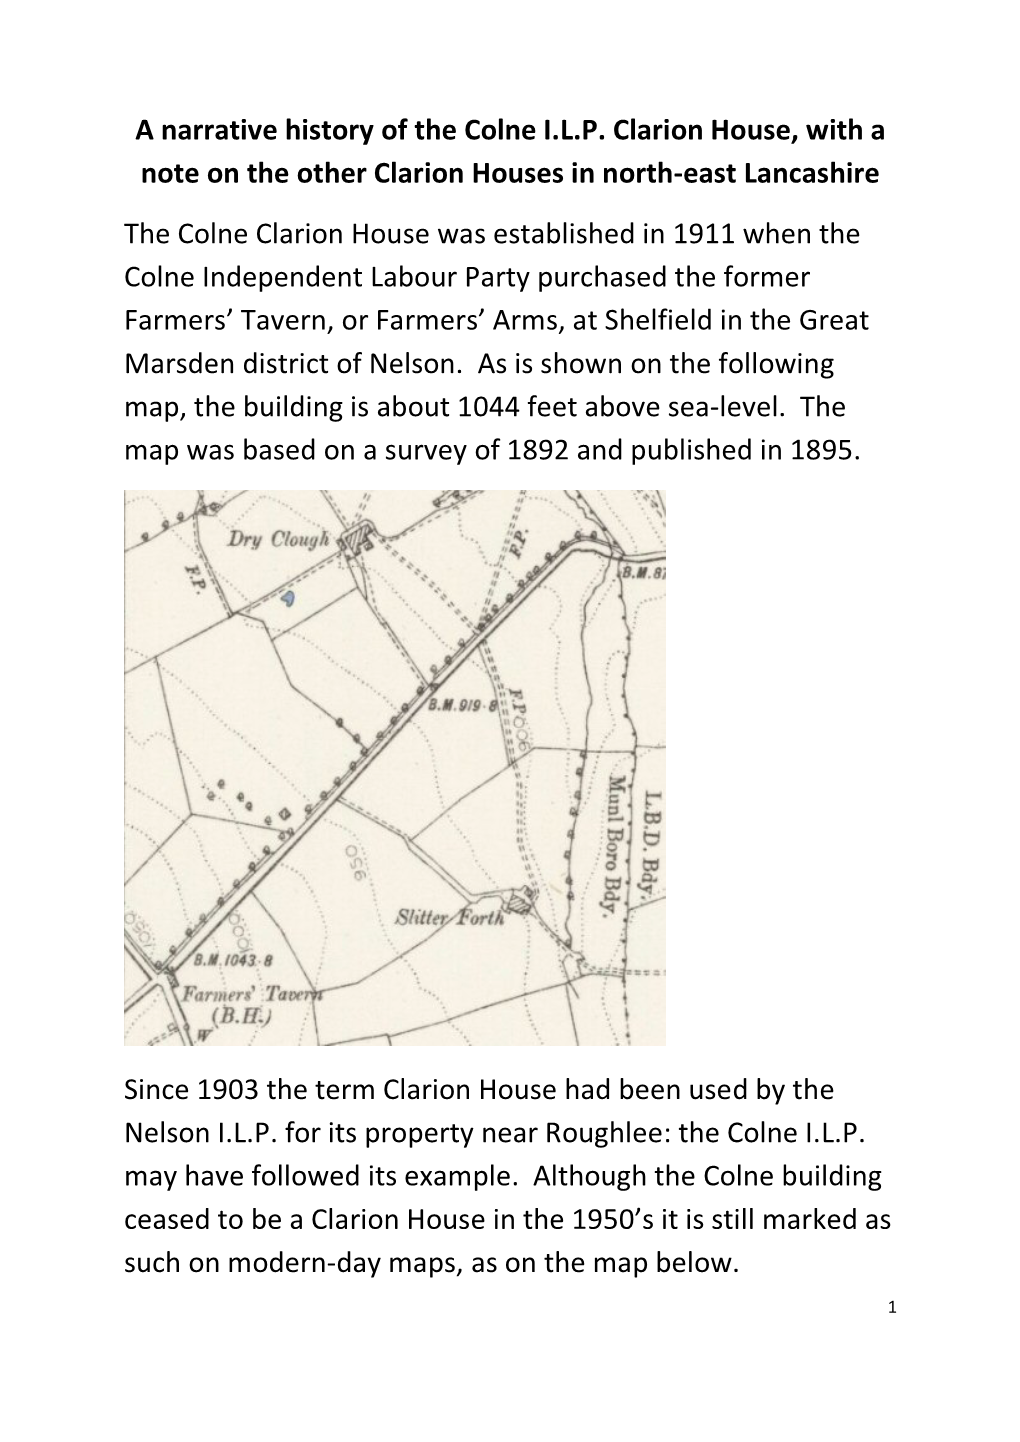 A Narrative History of the Colne ILP Clarion House, with A